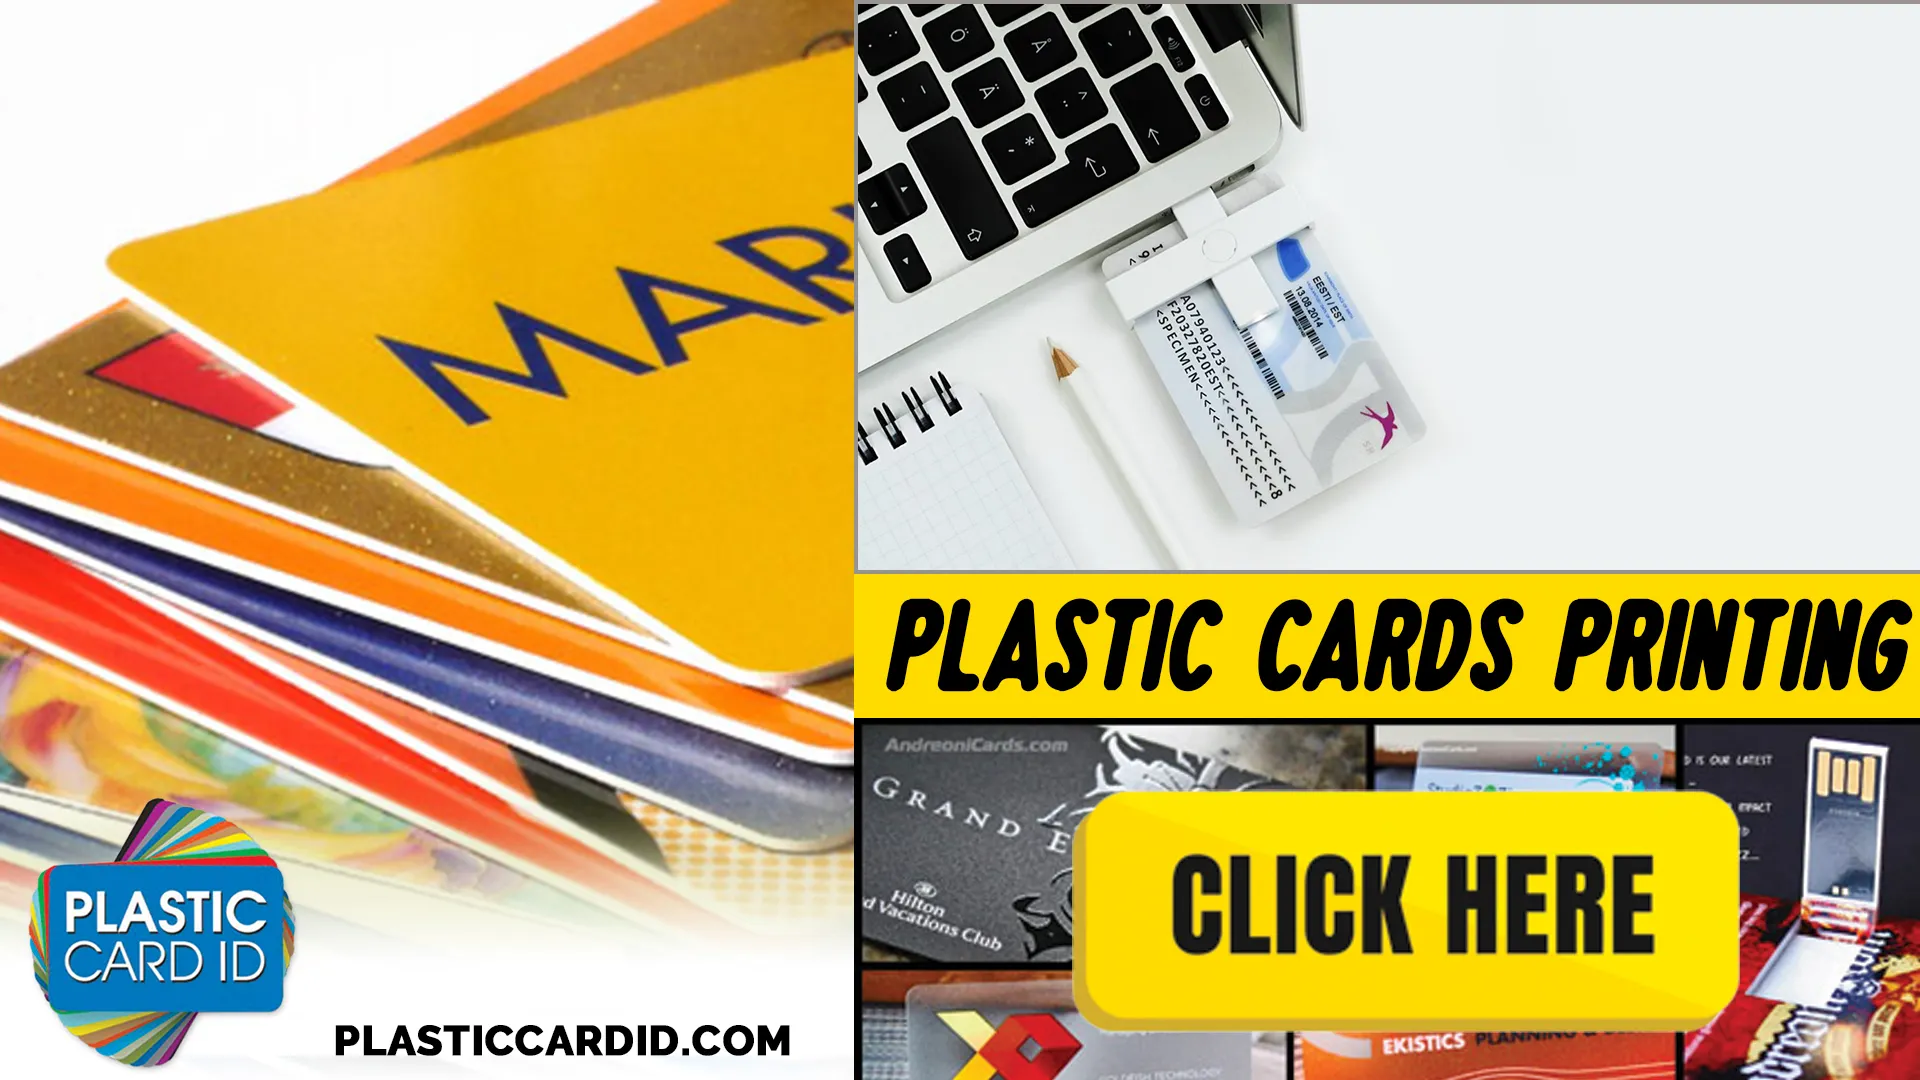 Captivating Your Audience with Intuitive Card Design